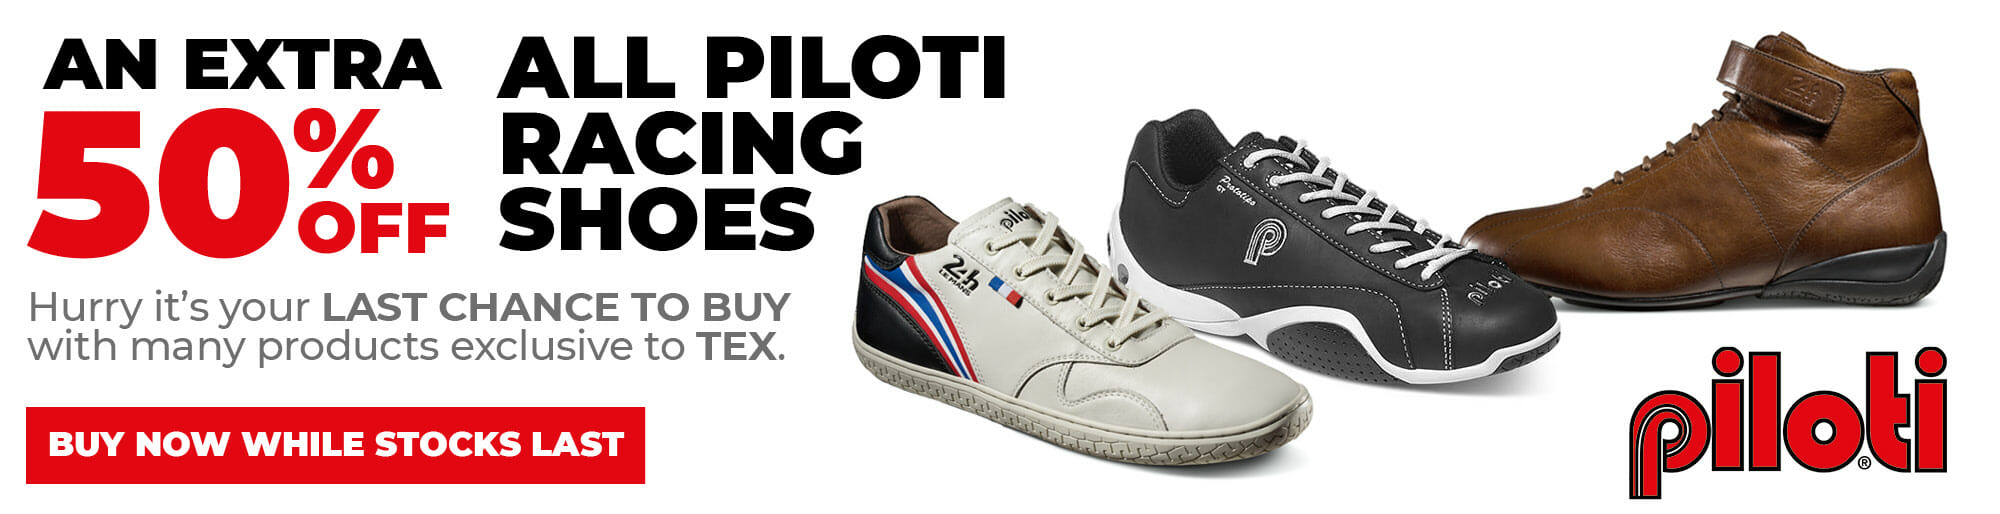 Piloti Clearance Extra 50% Off